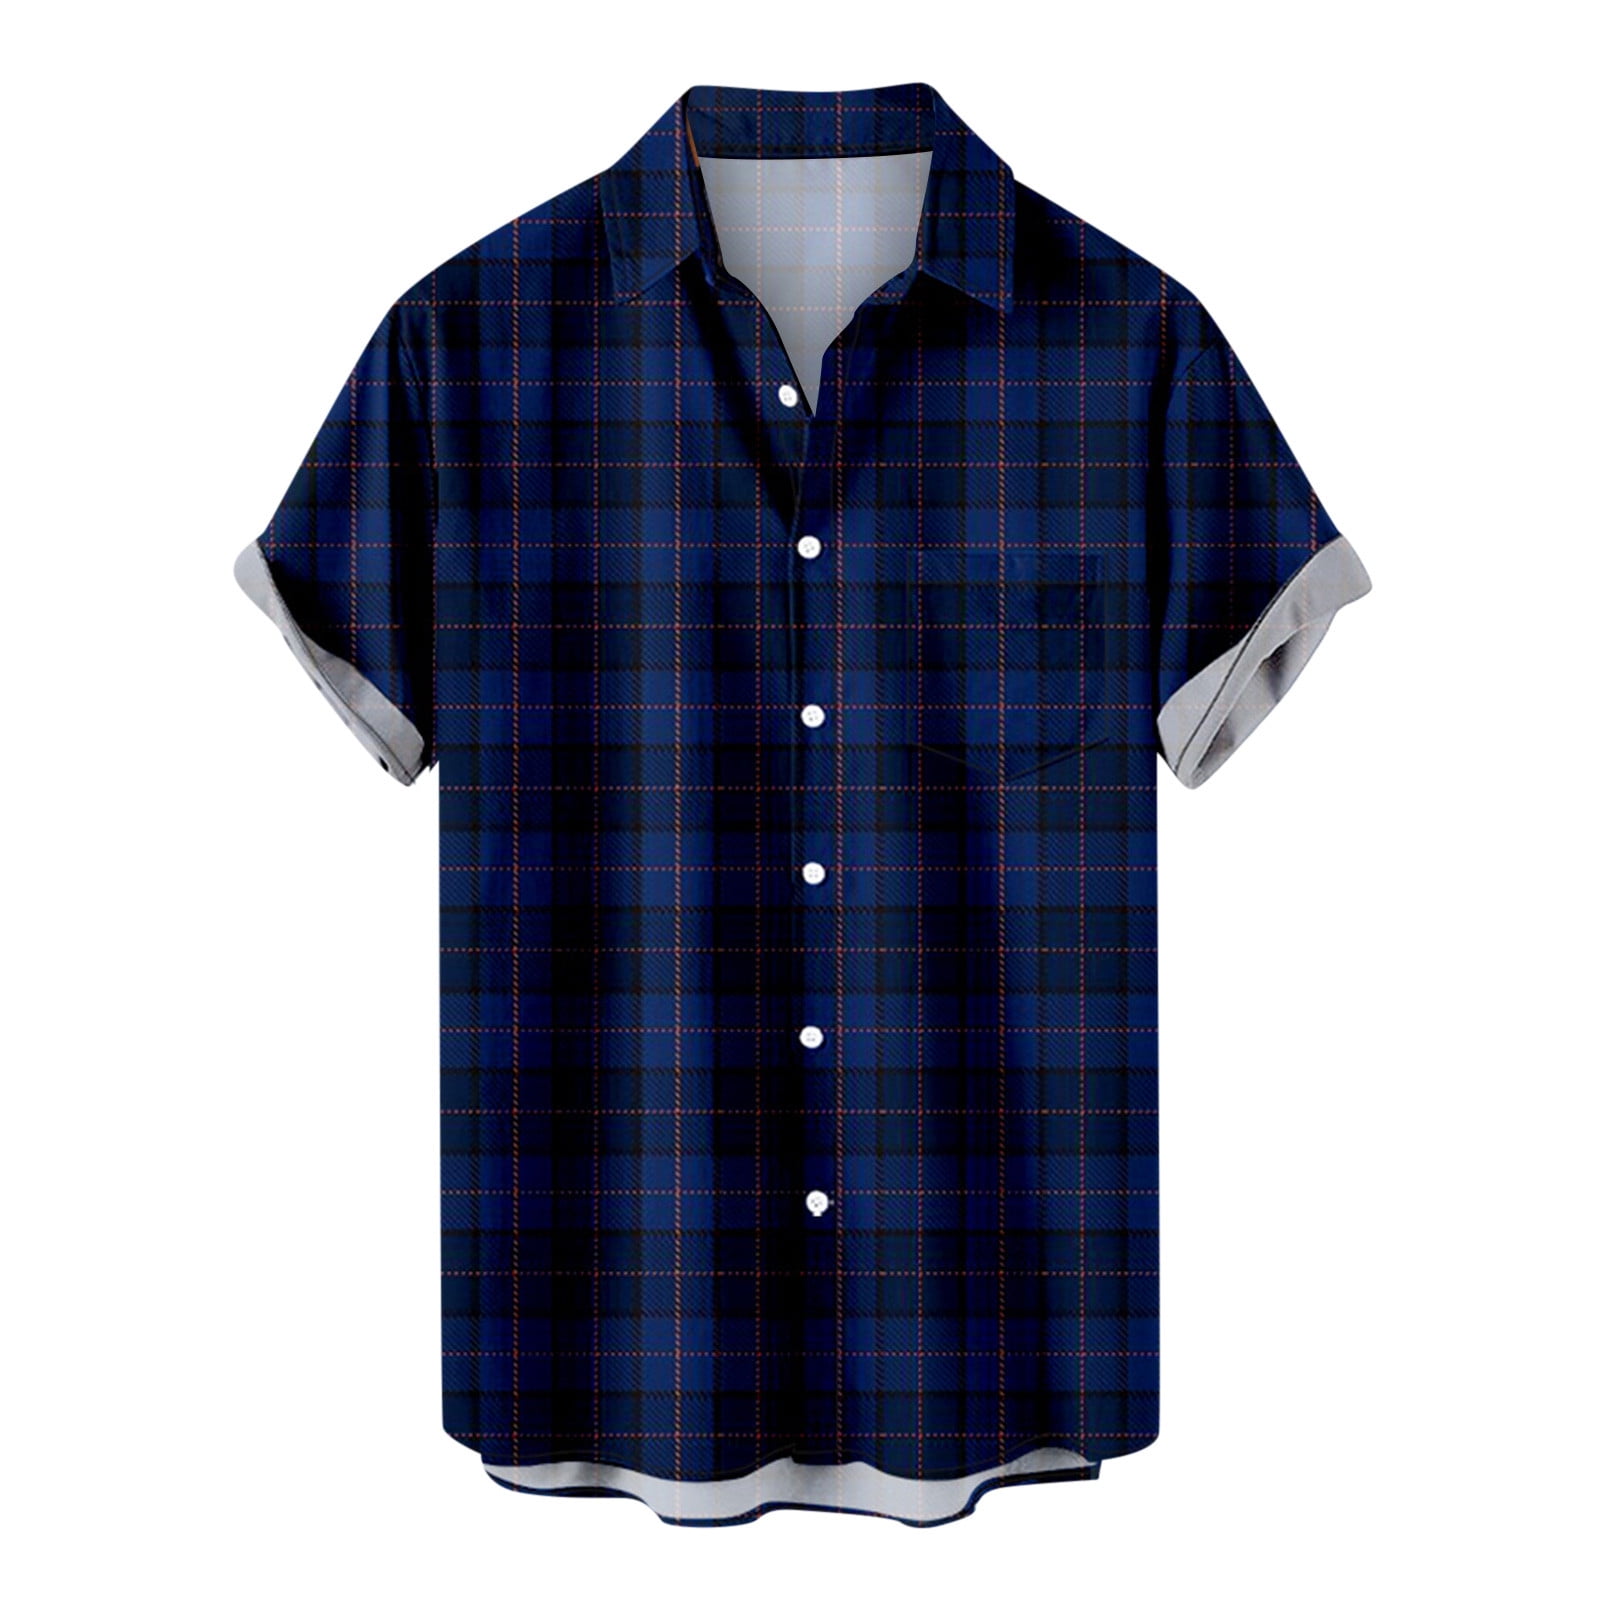 VSSSJ Beach Shirts for Men Loose Fit Plaid Print Casual Button Down Short  Sleeve Collared Tee Tops with Pocket Summer Lightweight Casual Shirt Blouse